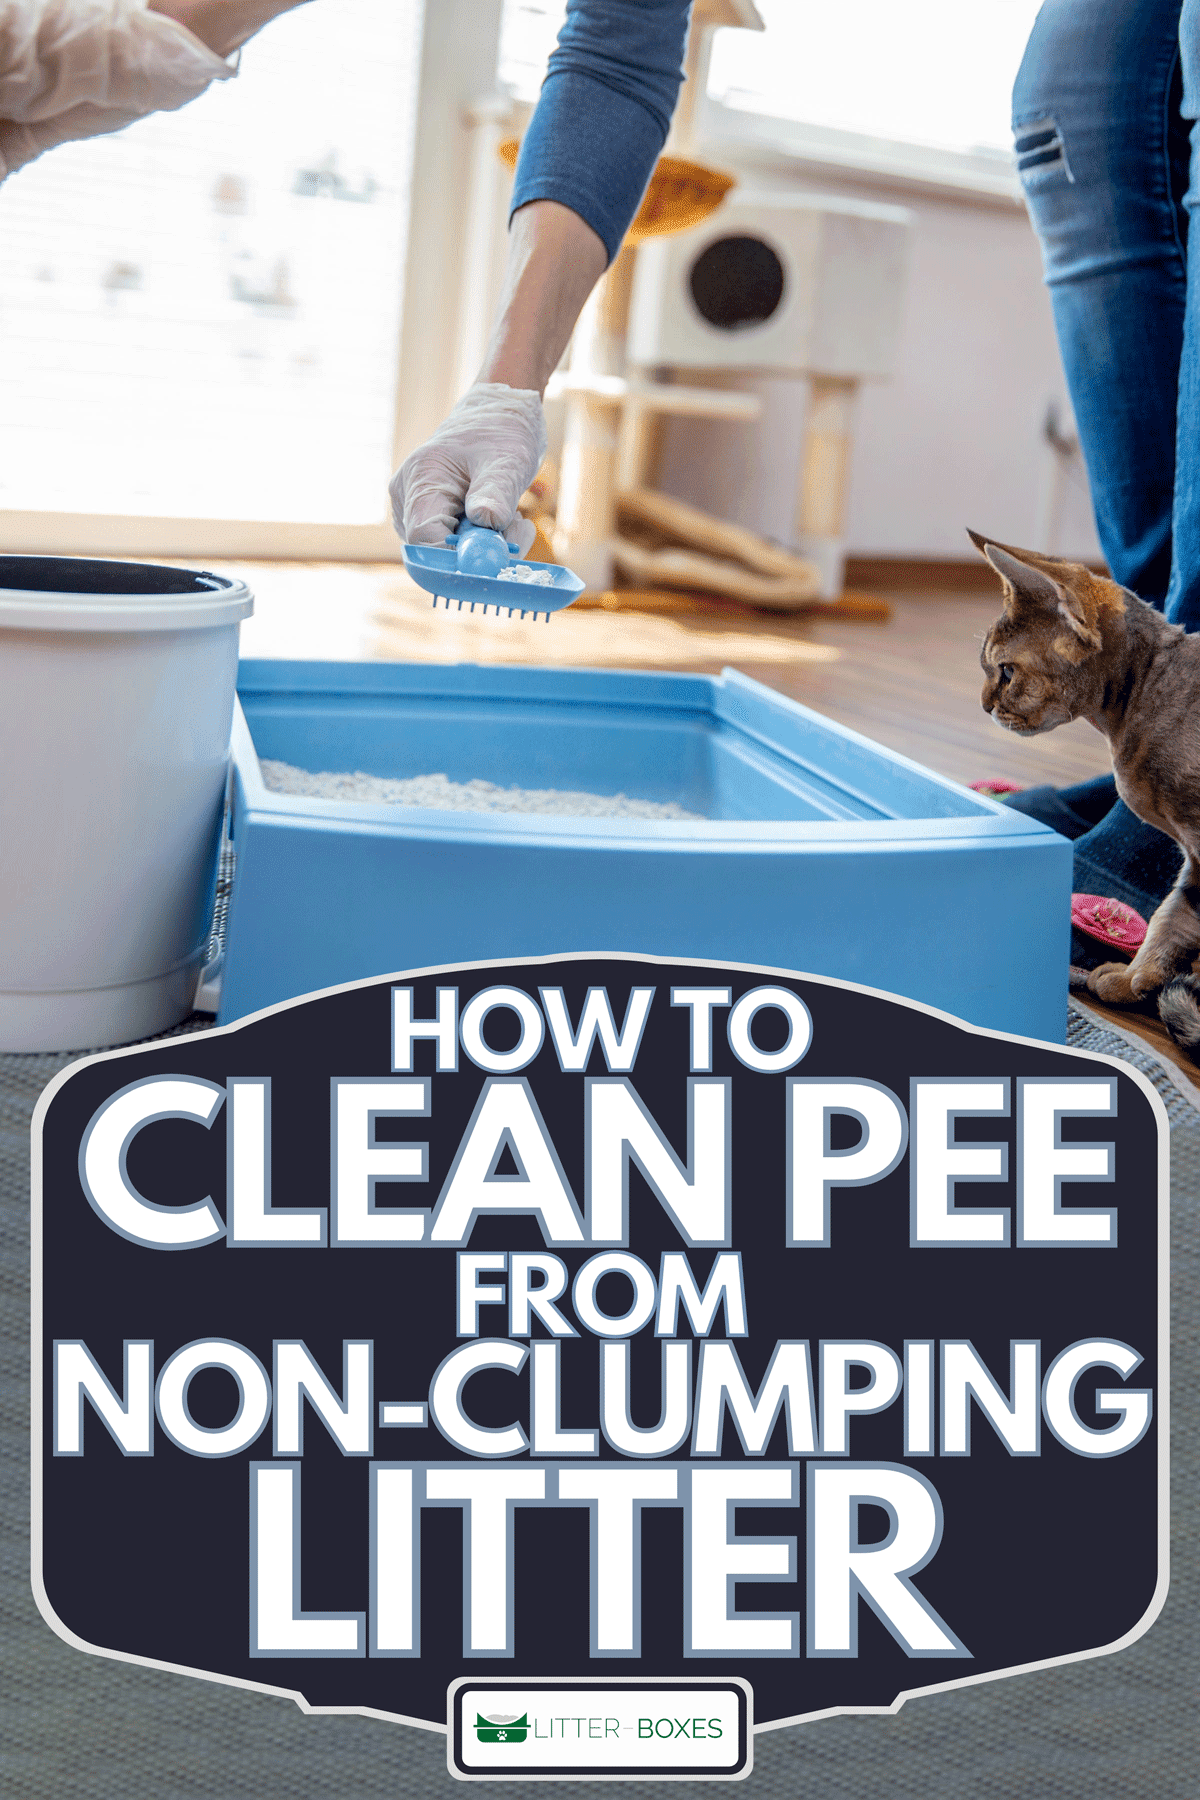 Adult woman cleaning cat litter box, How To Clean Pee From Non-Clumping Litter